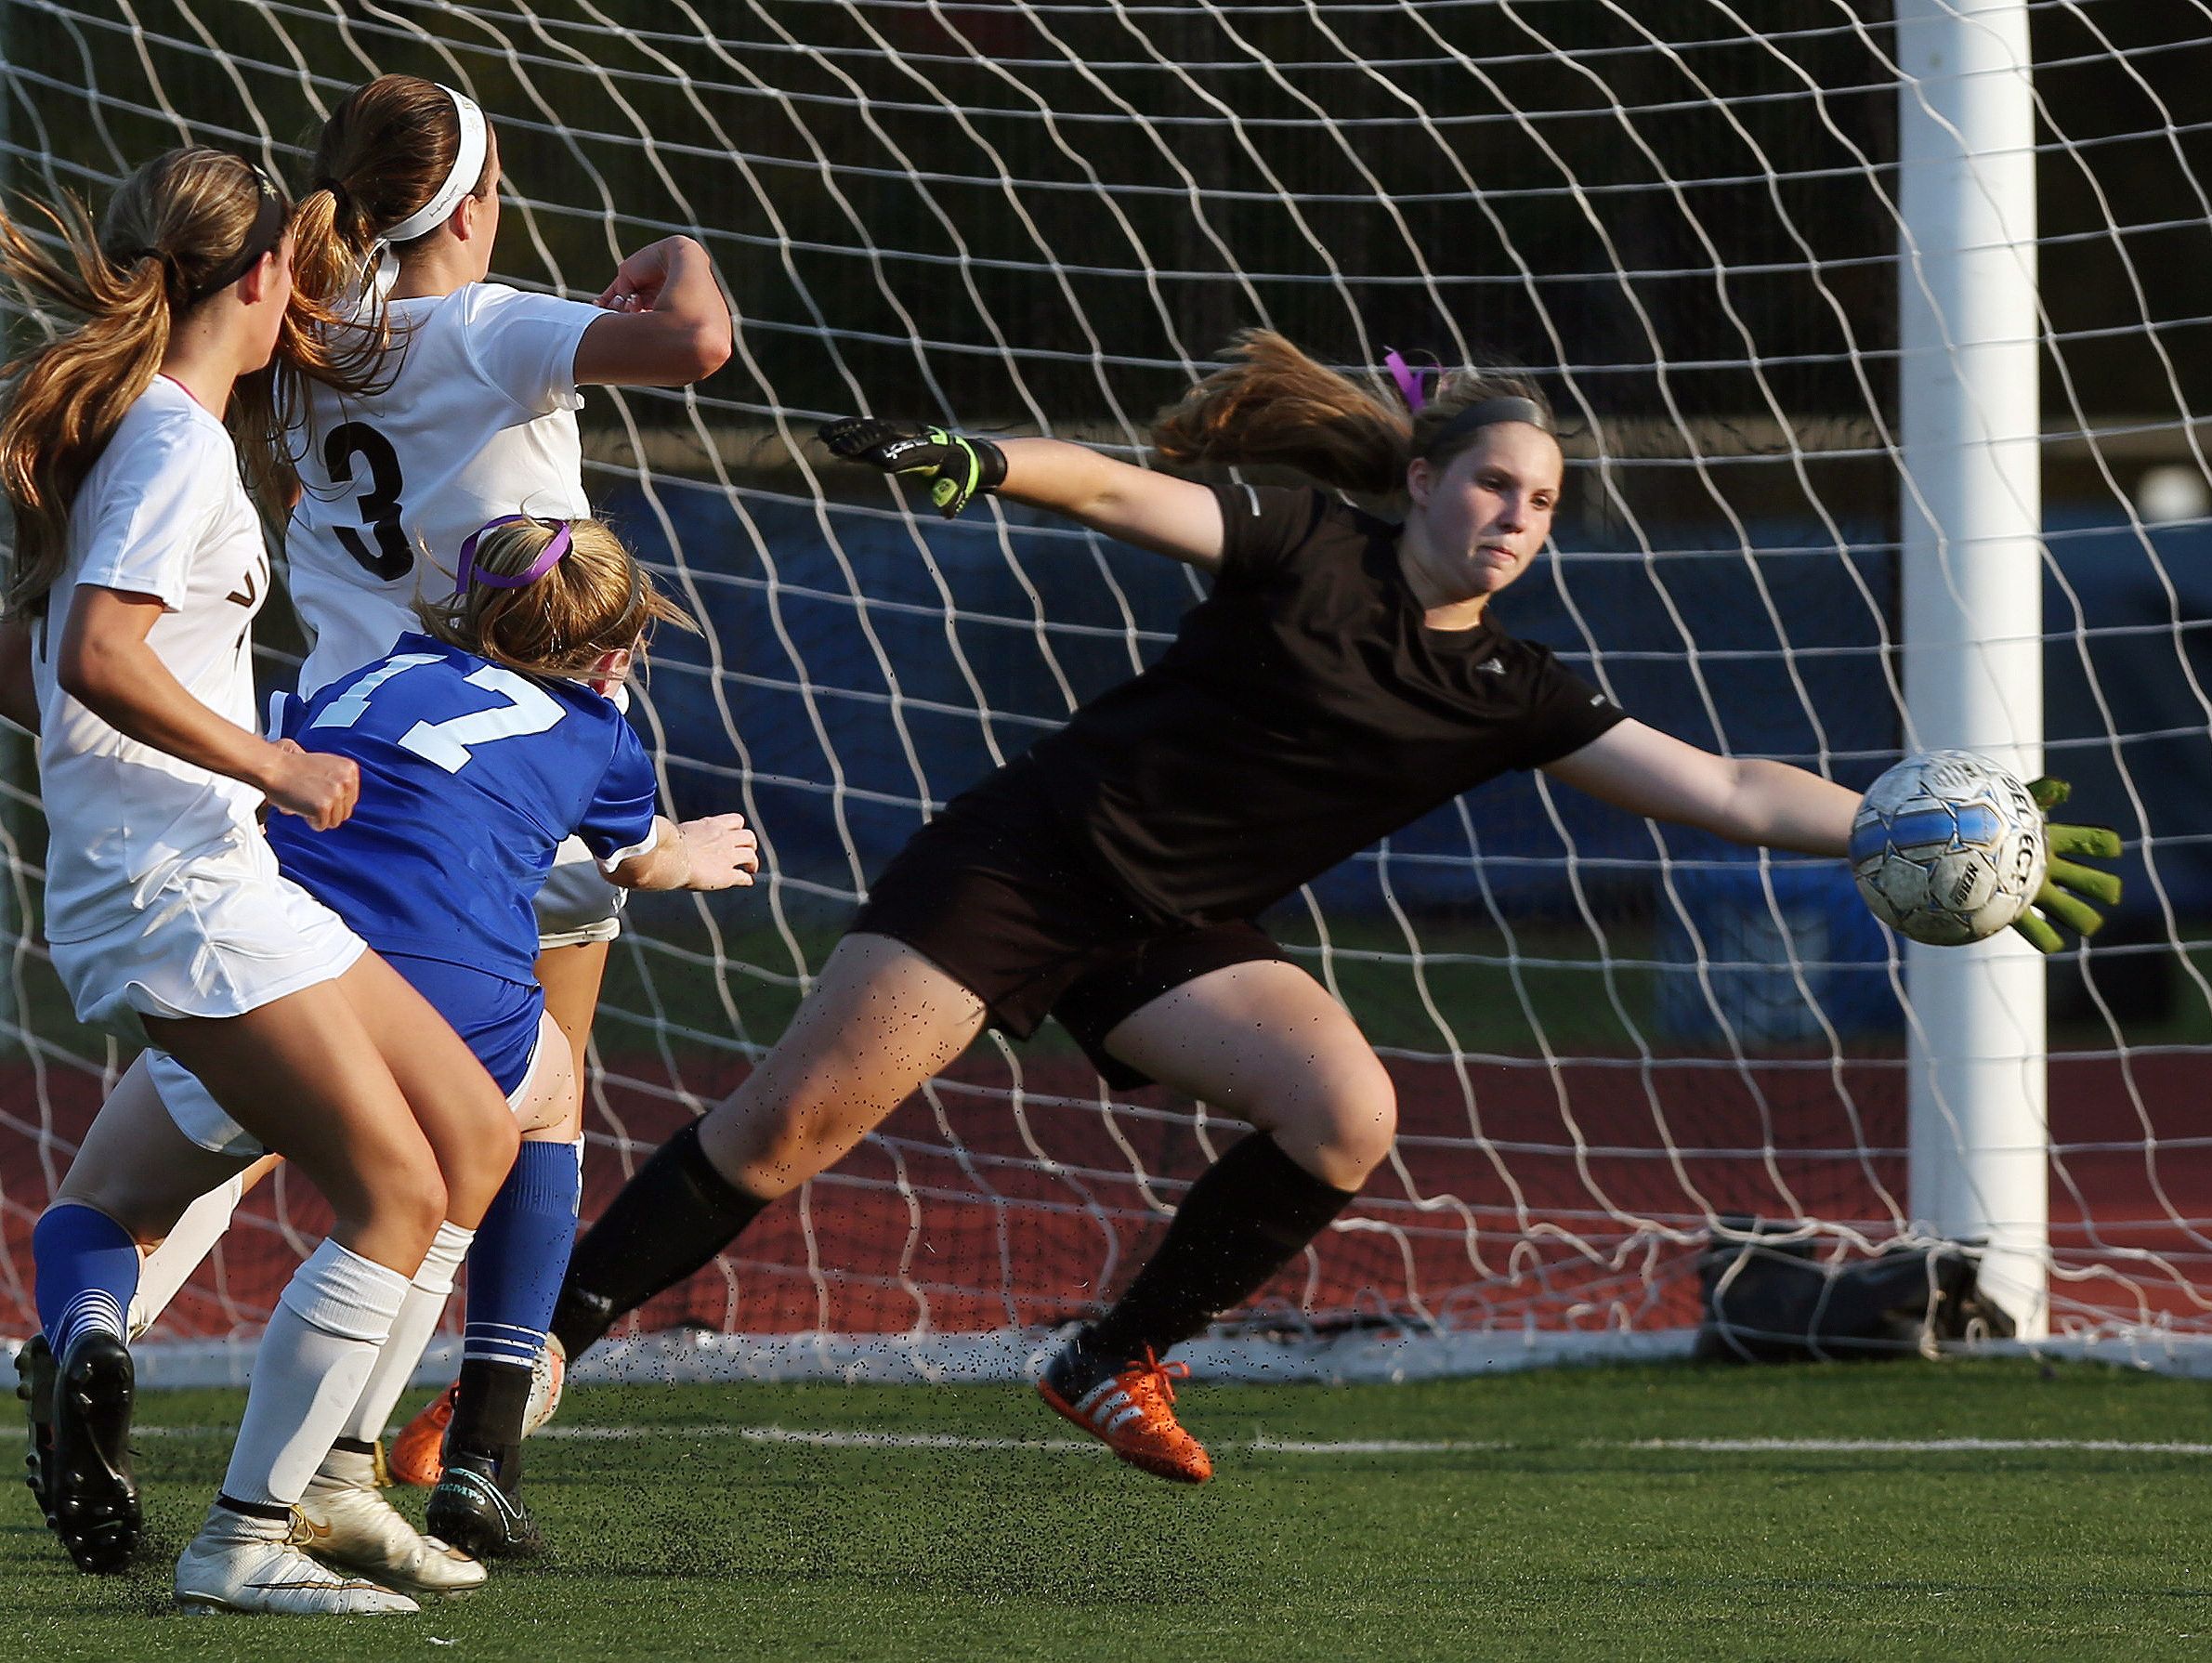 Pirates keeper Katherine Carstenson makes a save during Tuesday's game. Clarkstown South and Pearl River played to a 0-0 tie at Clarkstown South High School in West Nyack.